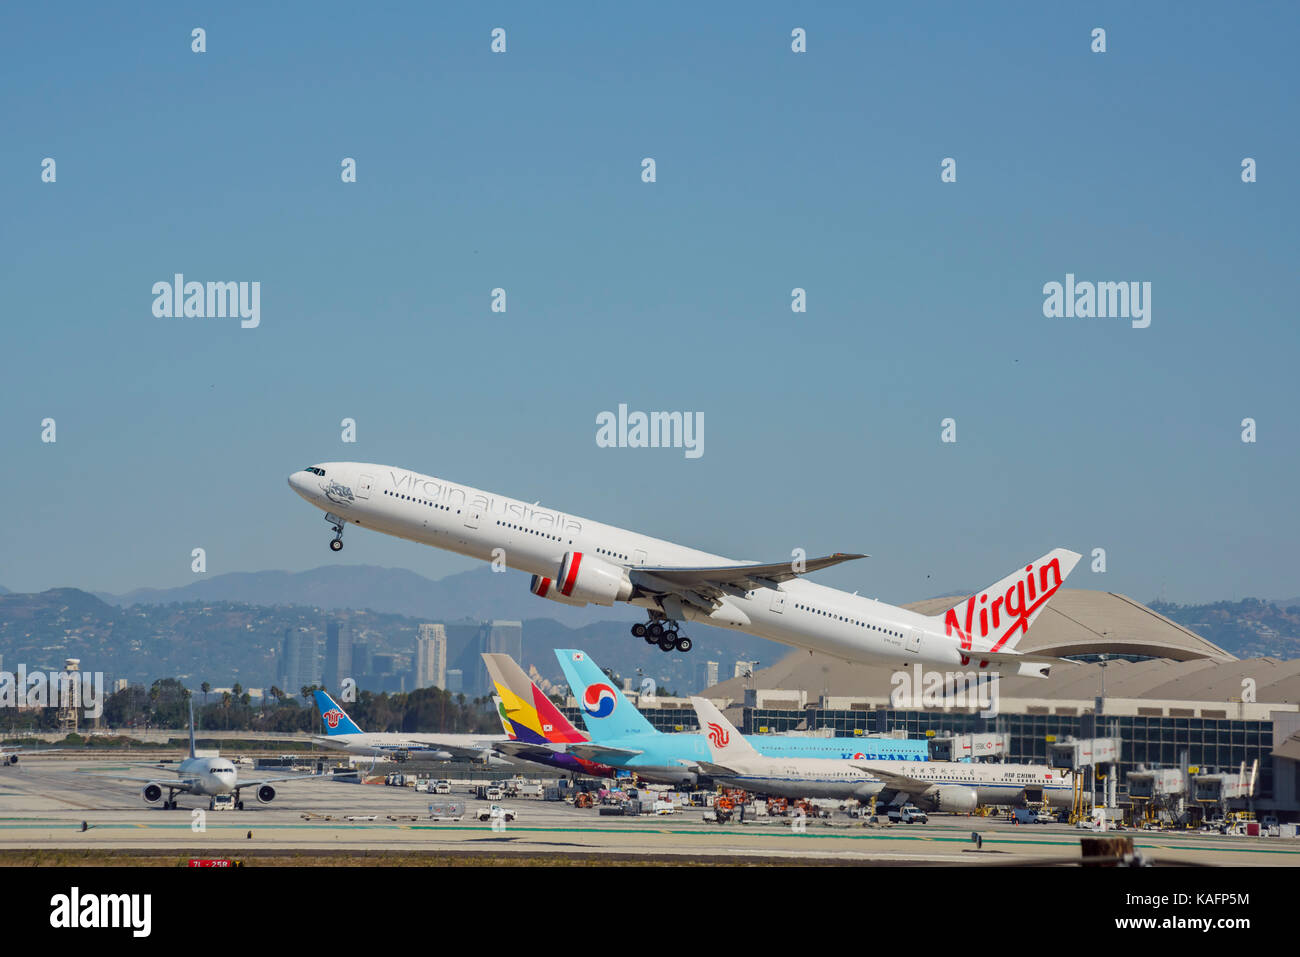 Los Angeles, SEP 24: Virgin Airline's airplane take off from the busy Los Angeles International Airport on SEP 24, 2017 at Los Angeles, California, Un Stock Photo